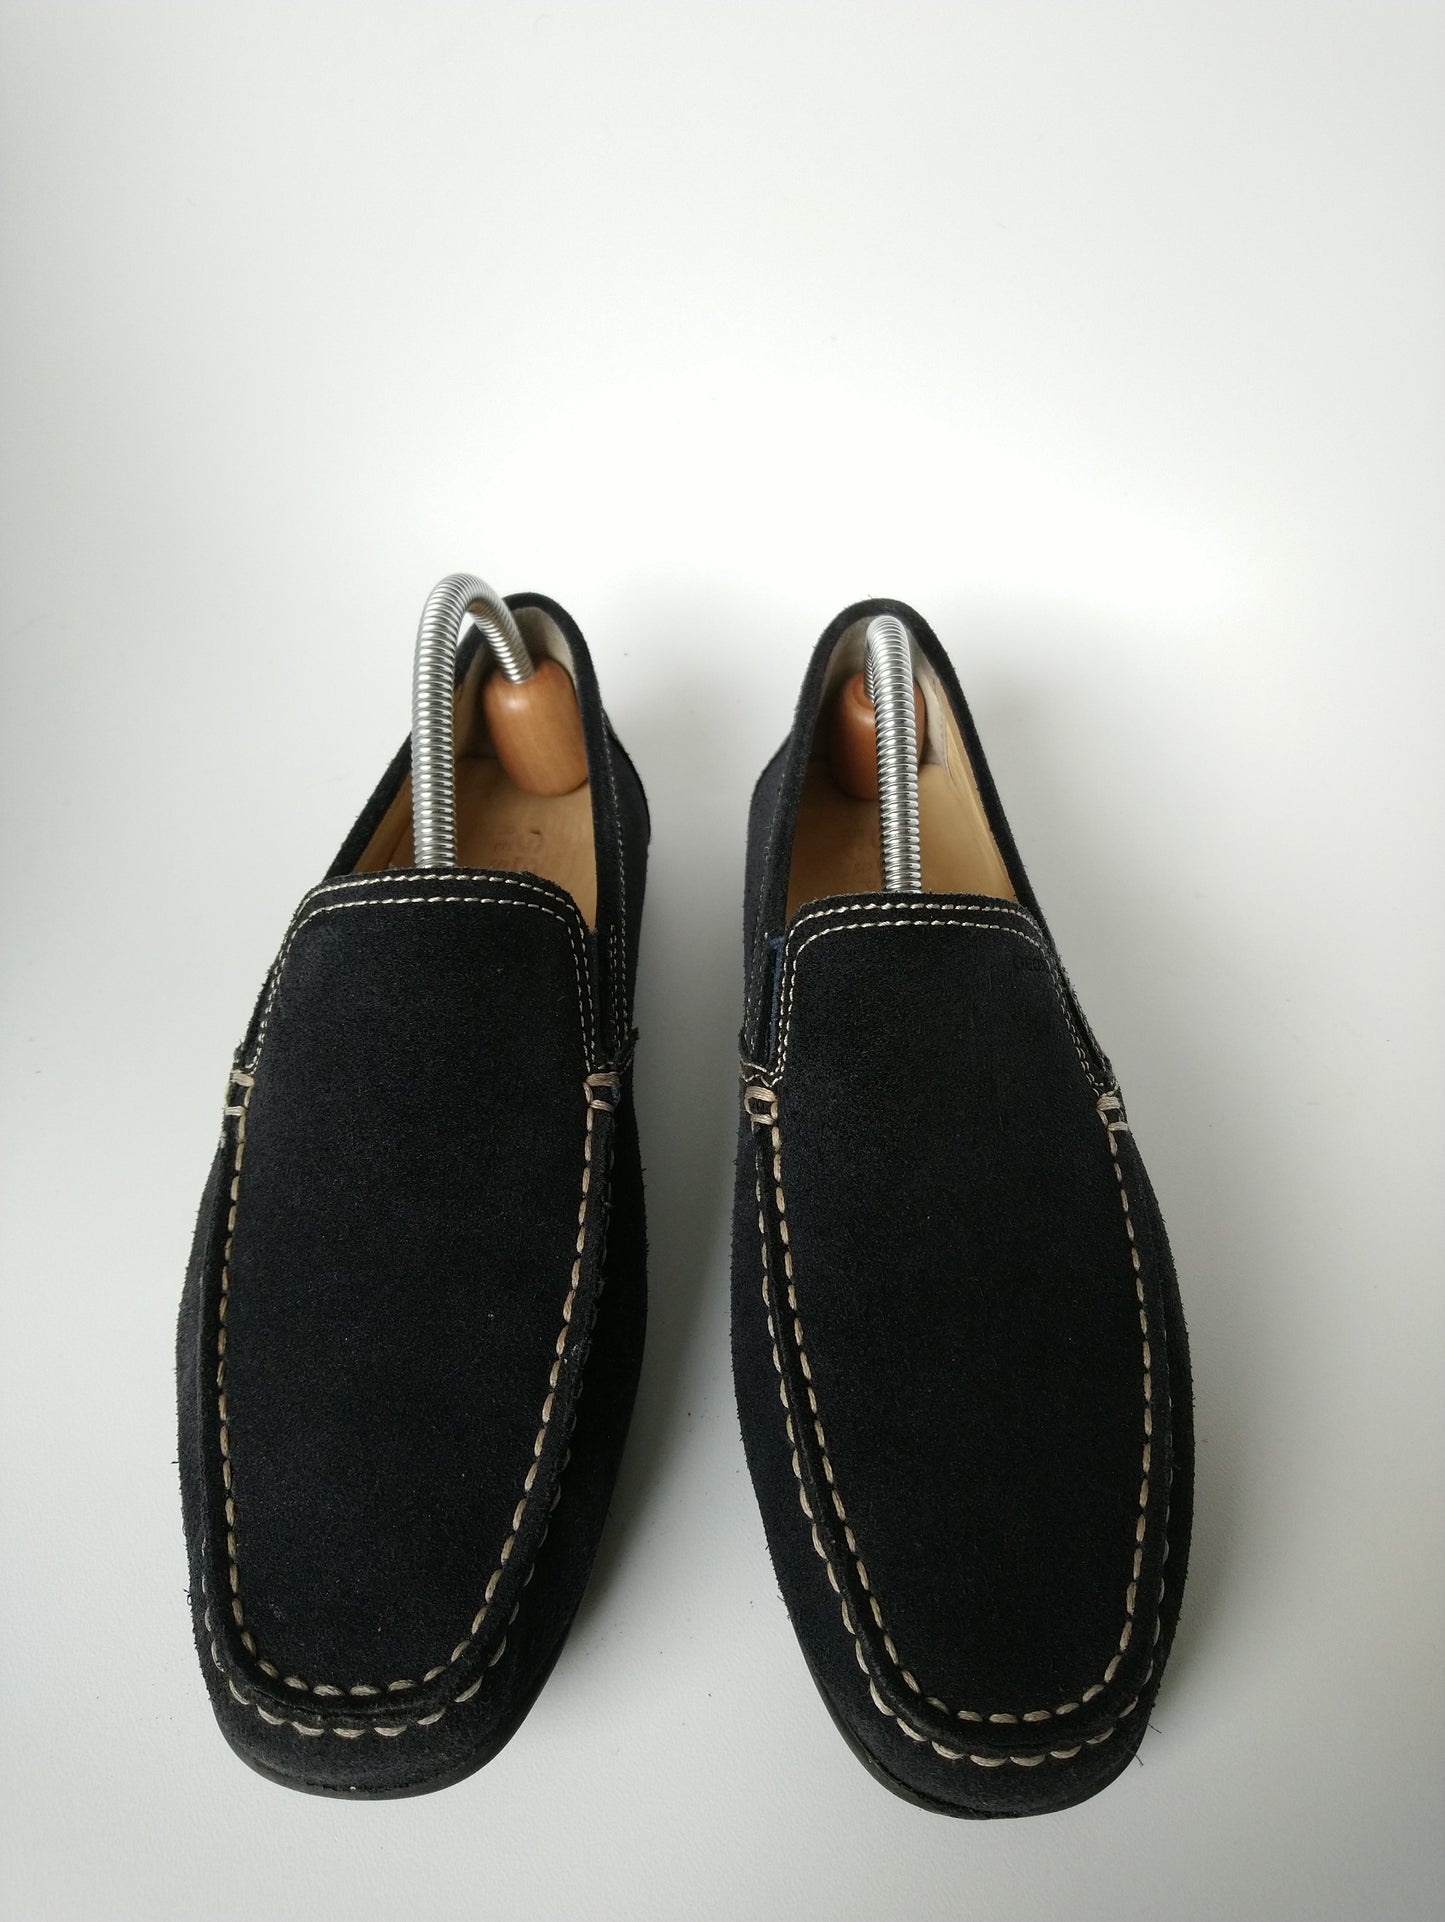 Geox Respira Leather Moccasins. Dark blue colored. Size 40.